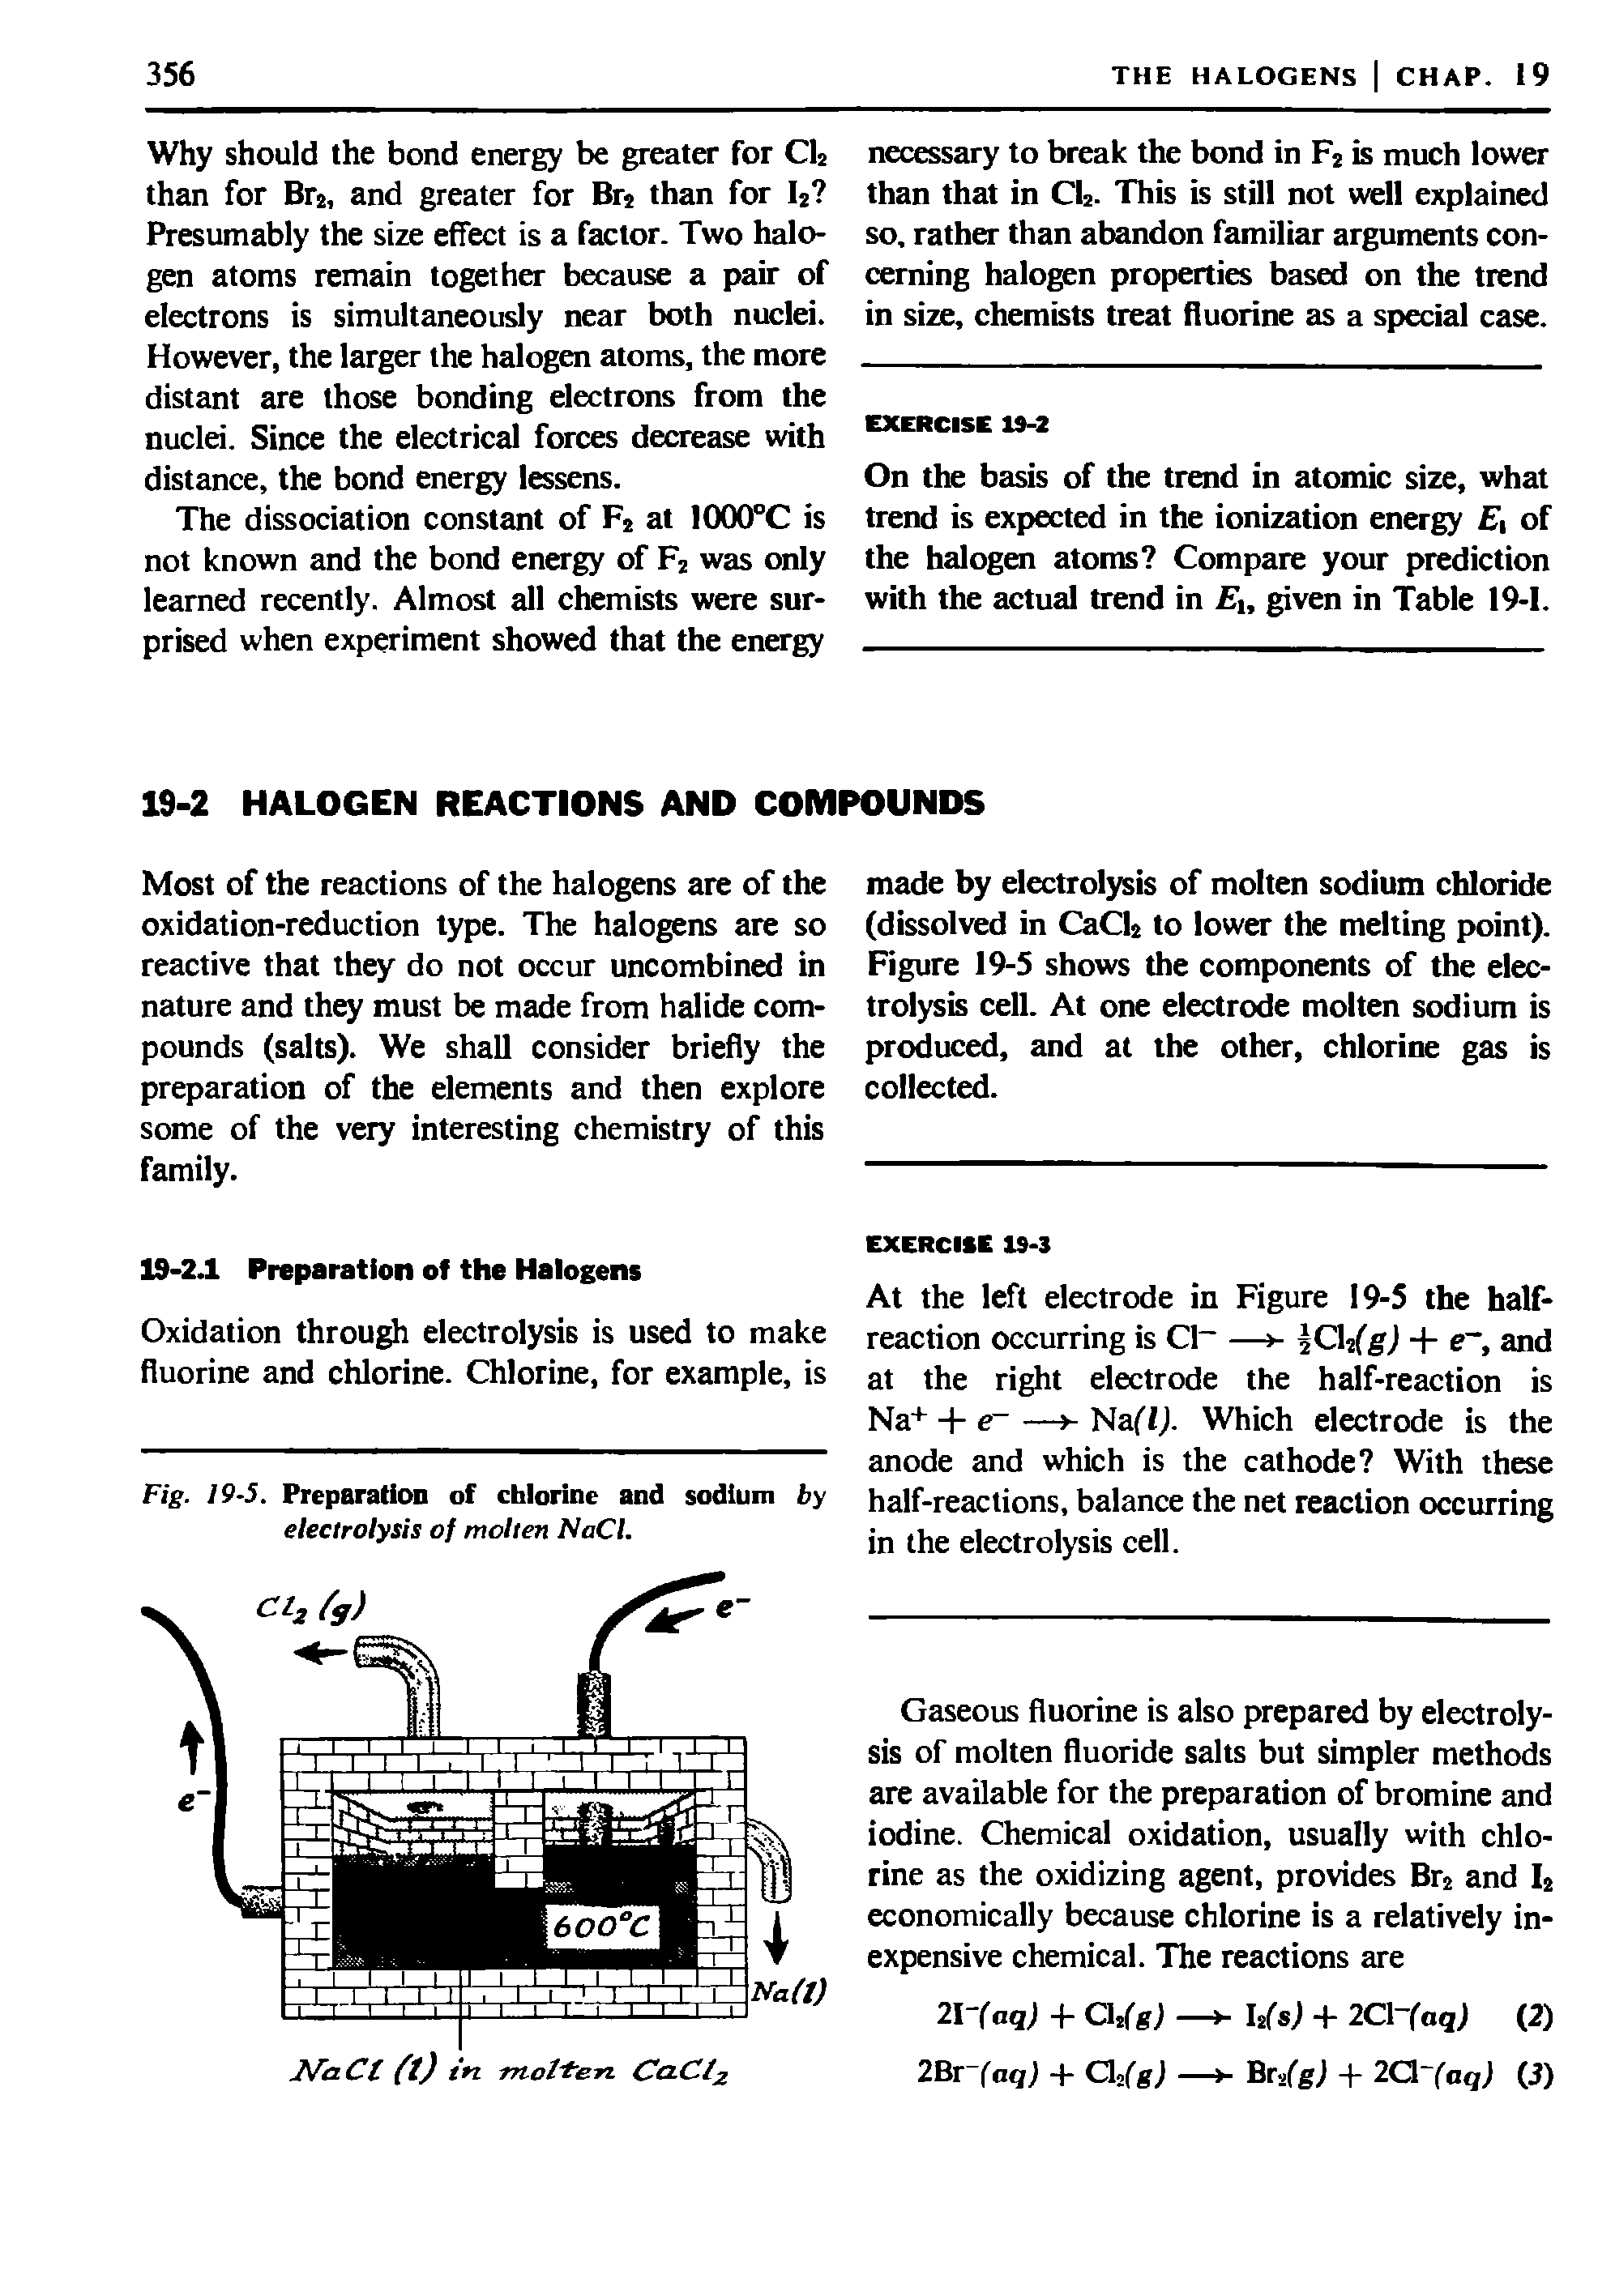 Fig. 19-5. Preparation of chlorine and sodium by electrolysis of molten NaCI.